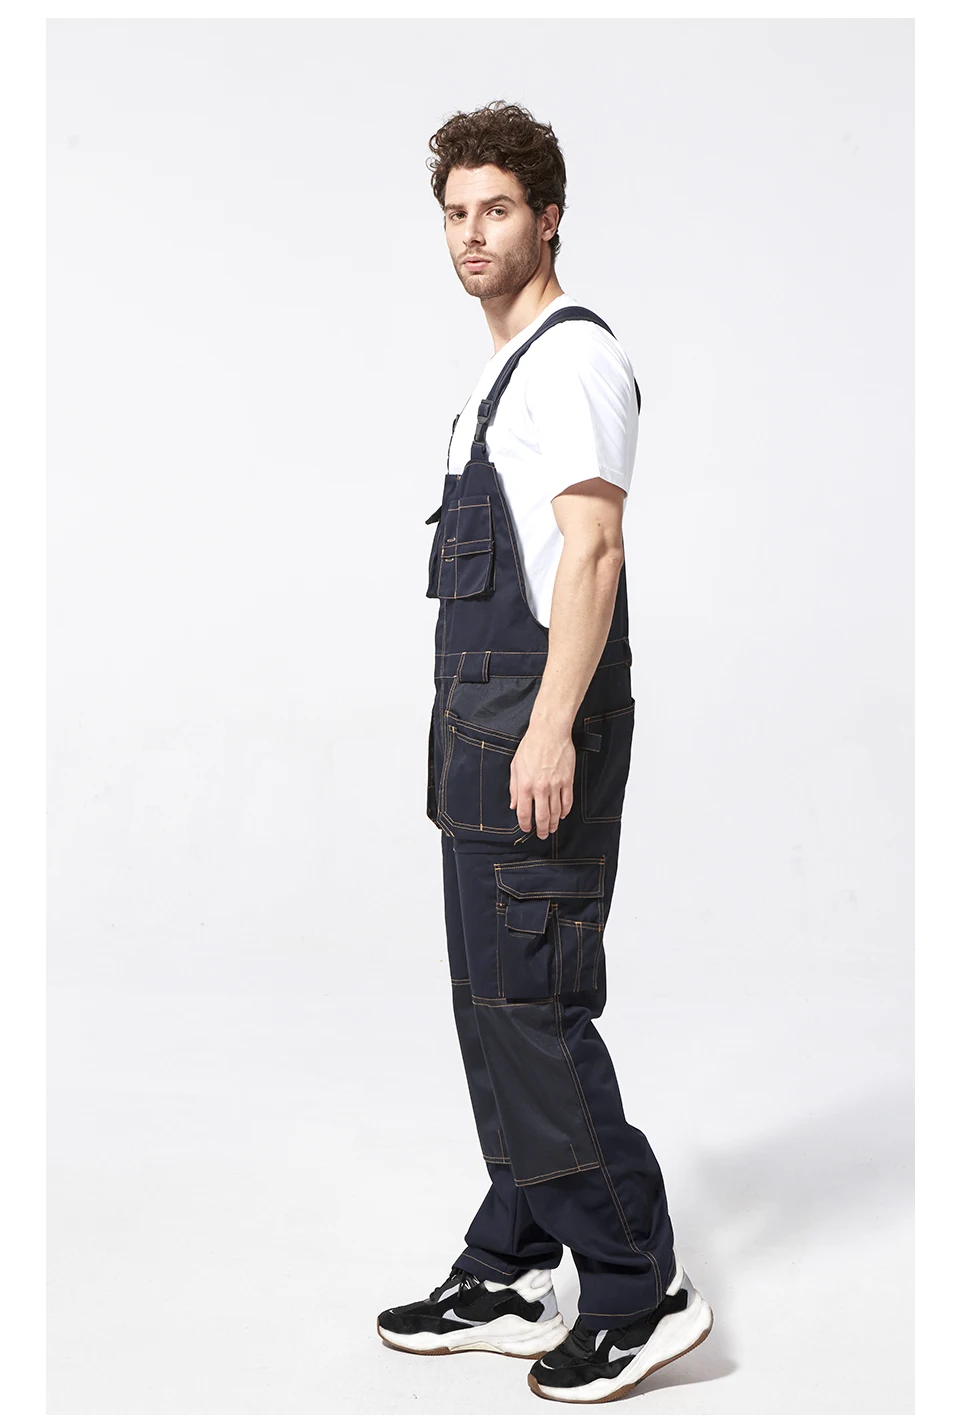 4TRA OF WORN OUT MULTI POCKET OVERALLS - ワークパンツ